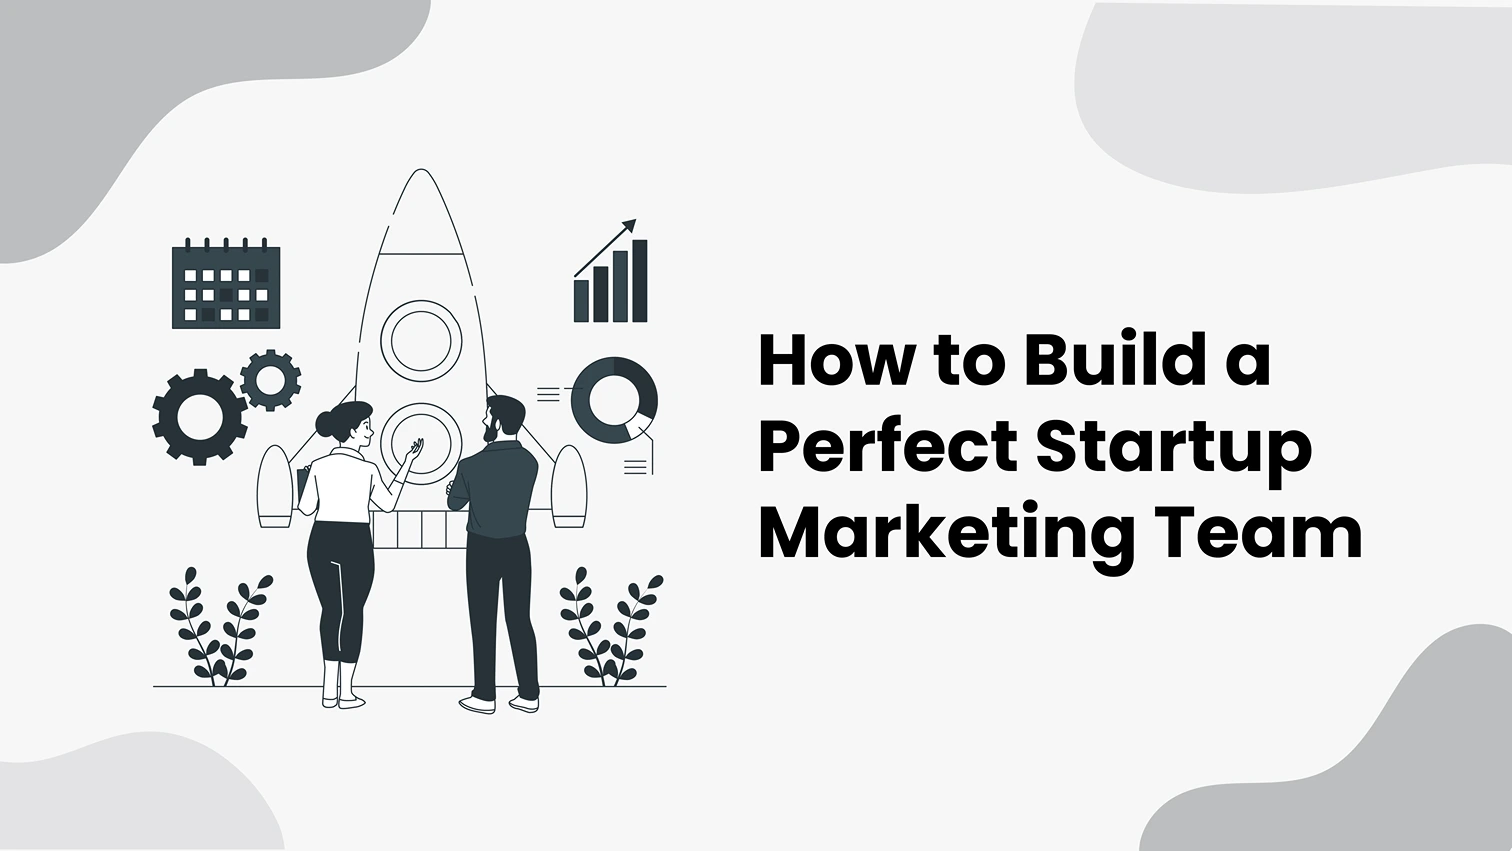 Build a Perfect Startup Marketing Team